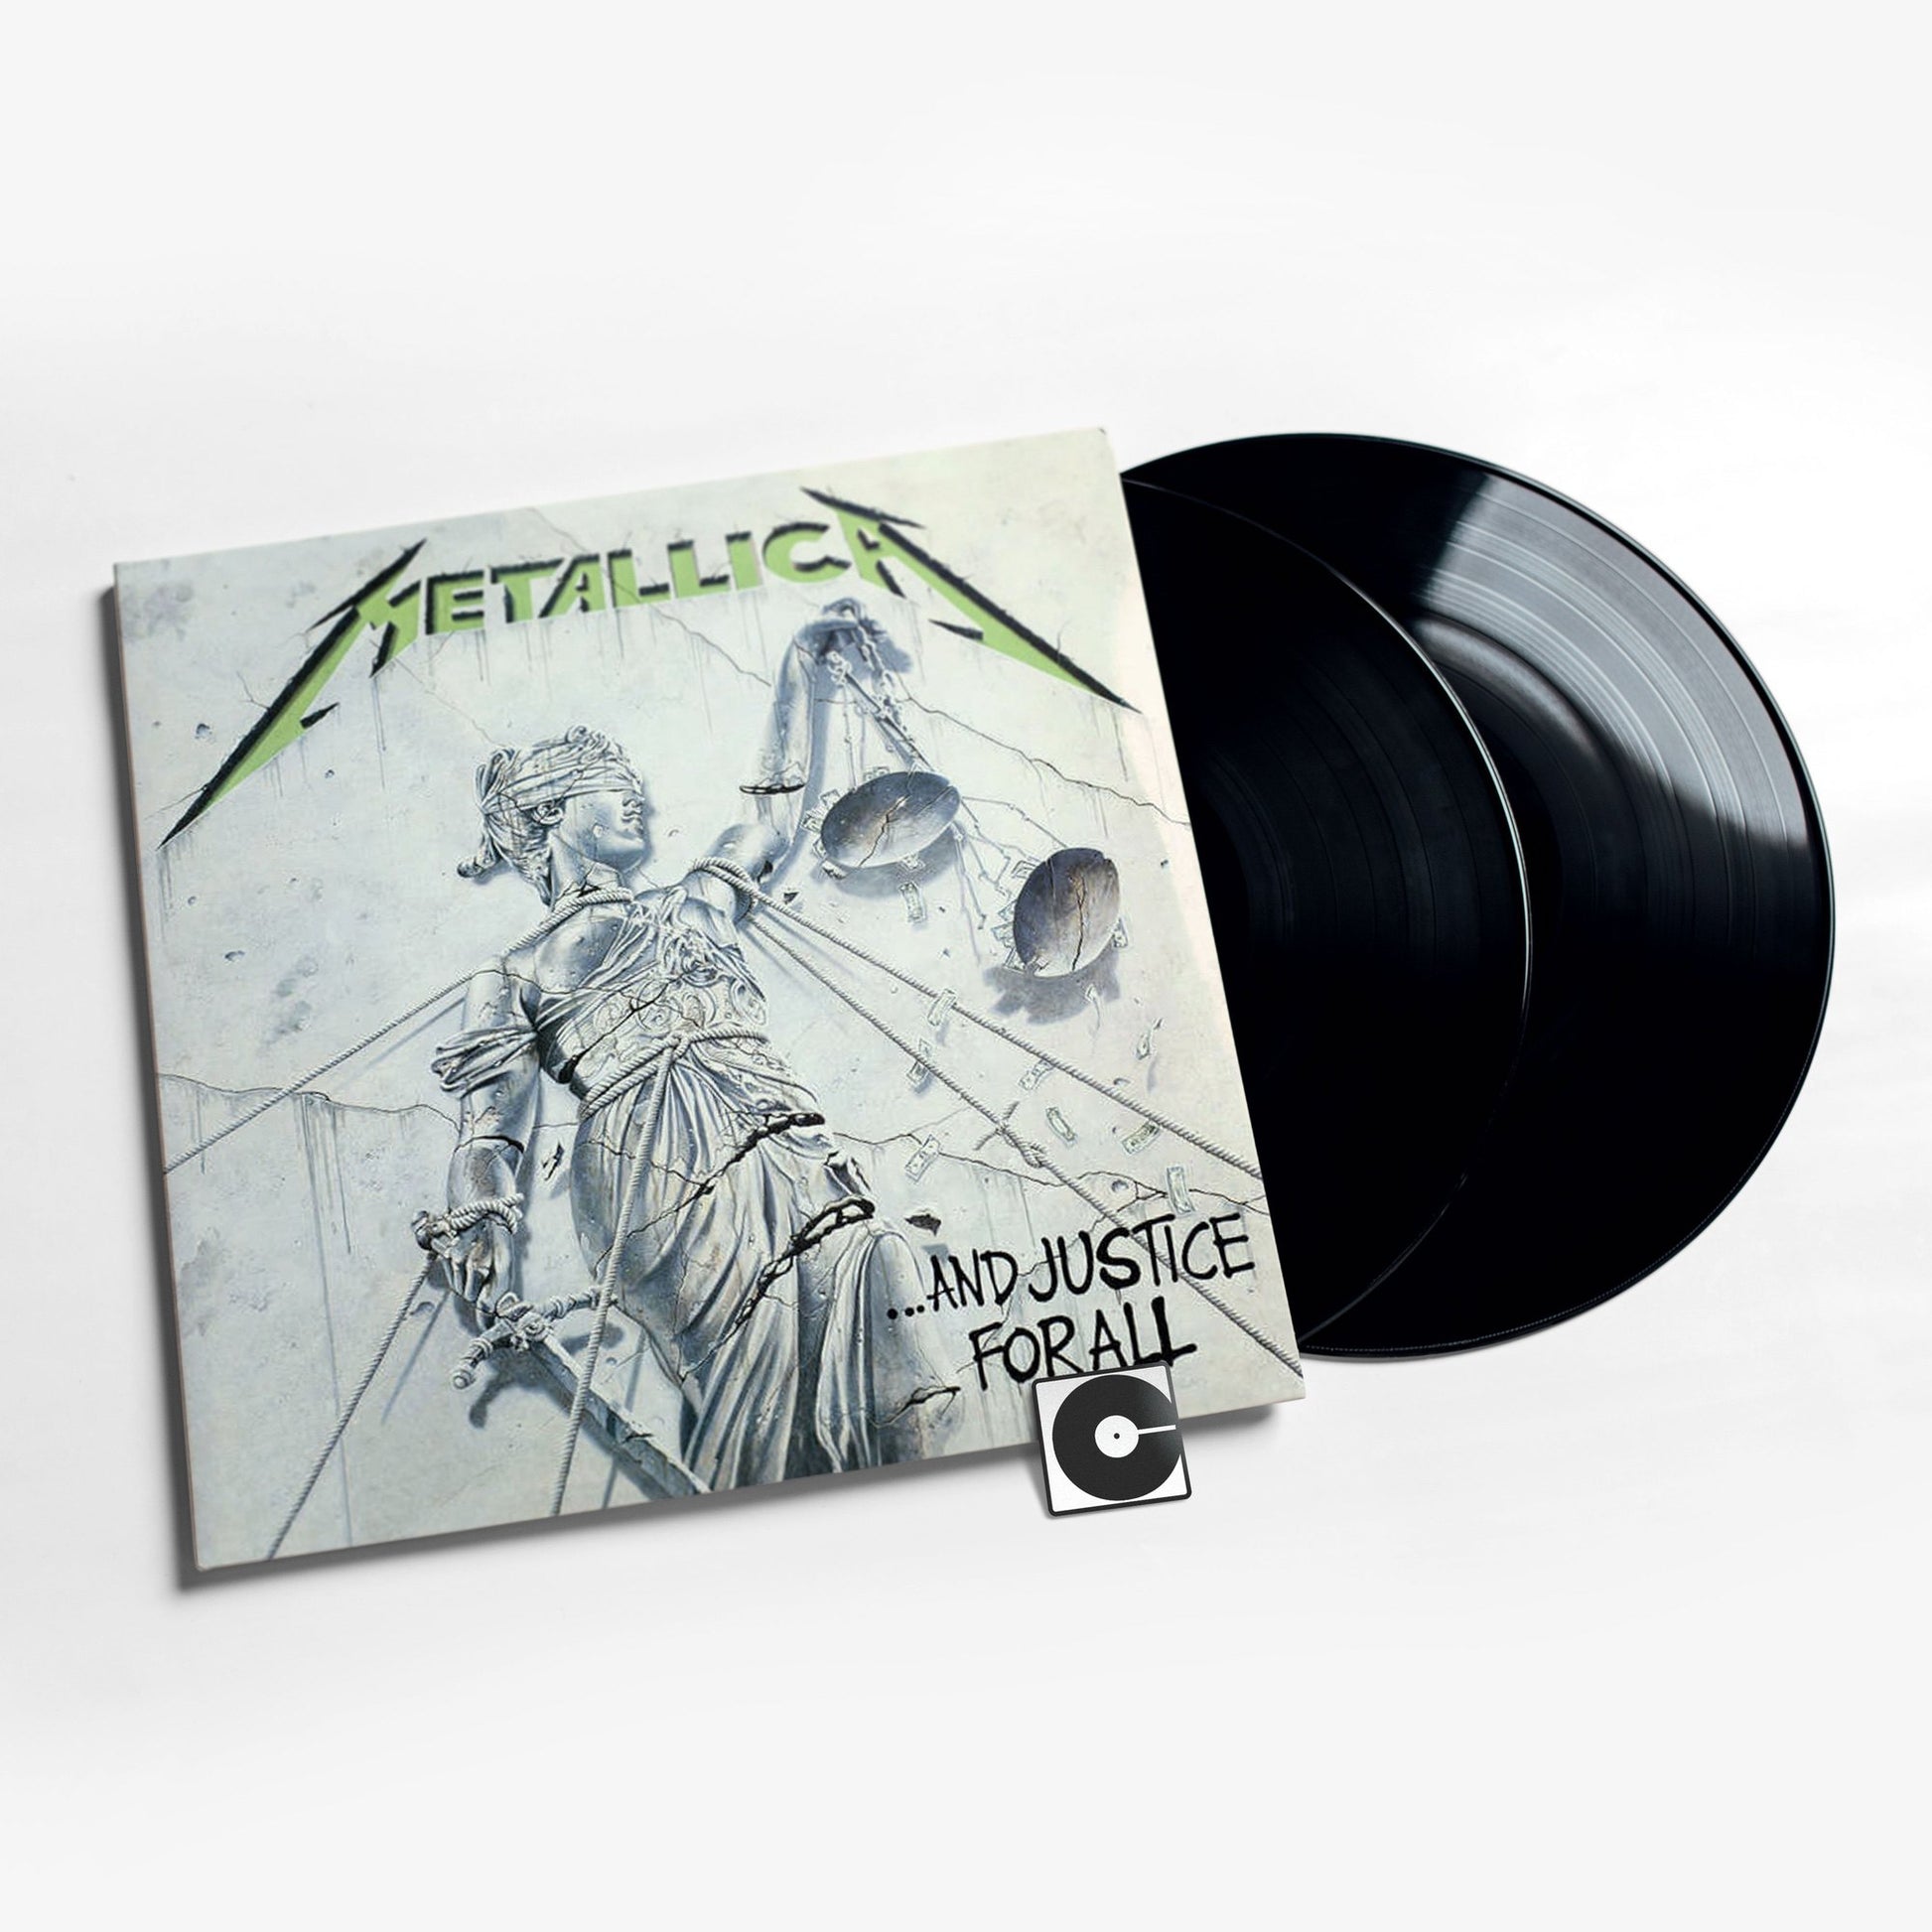 Metallica - "And Justice All" – Vinyl